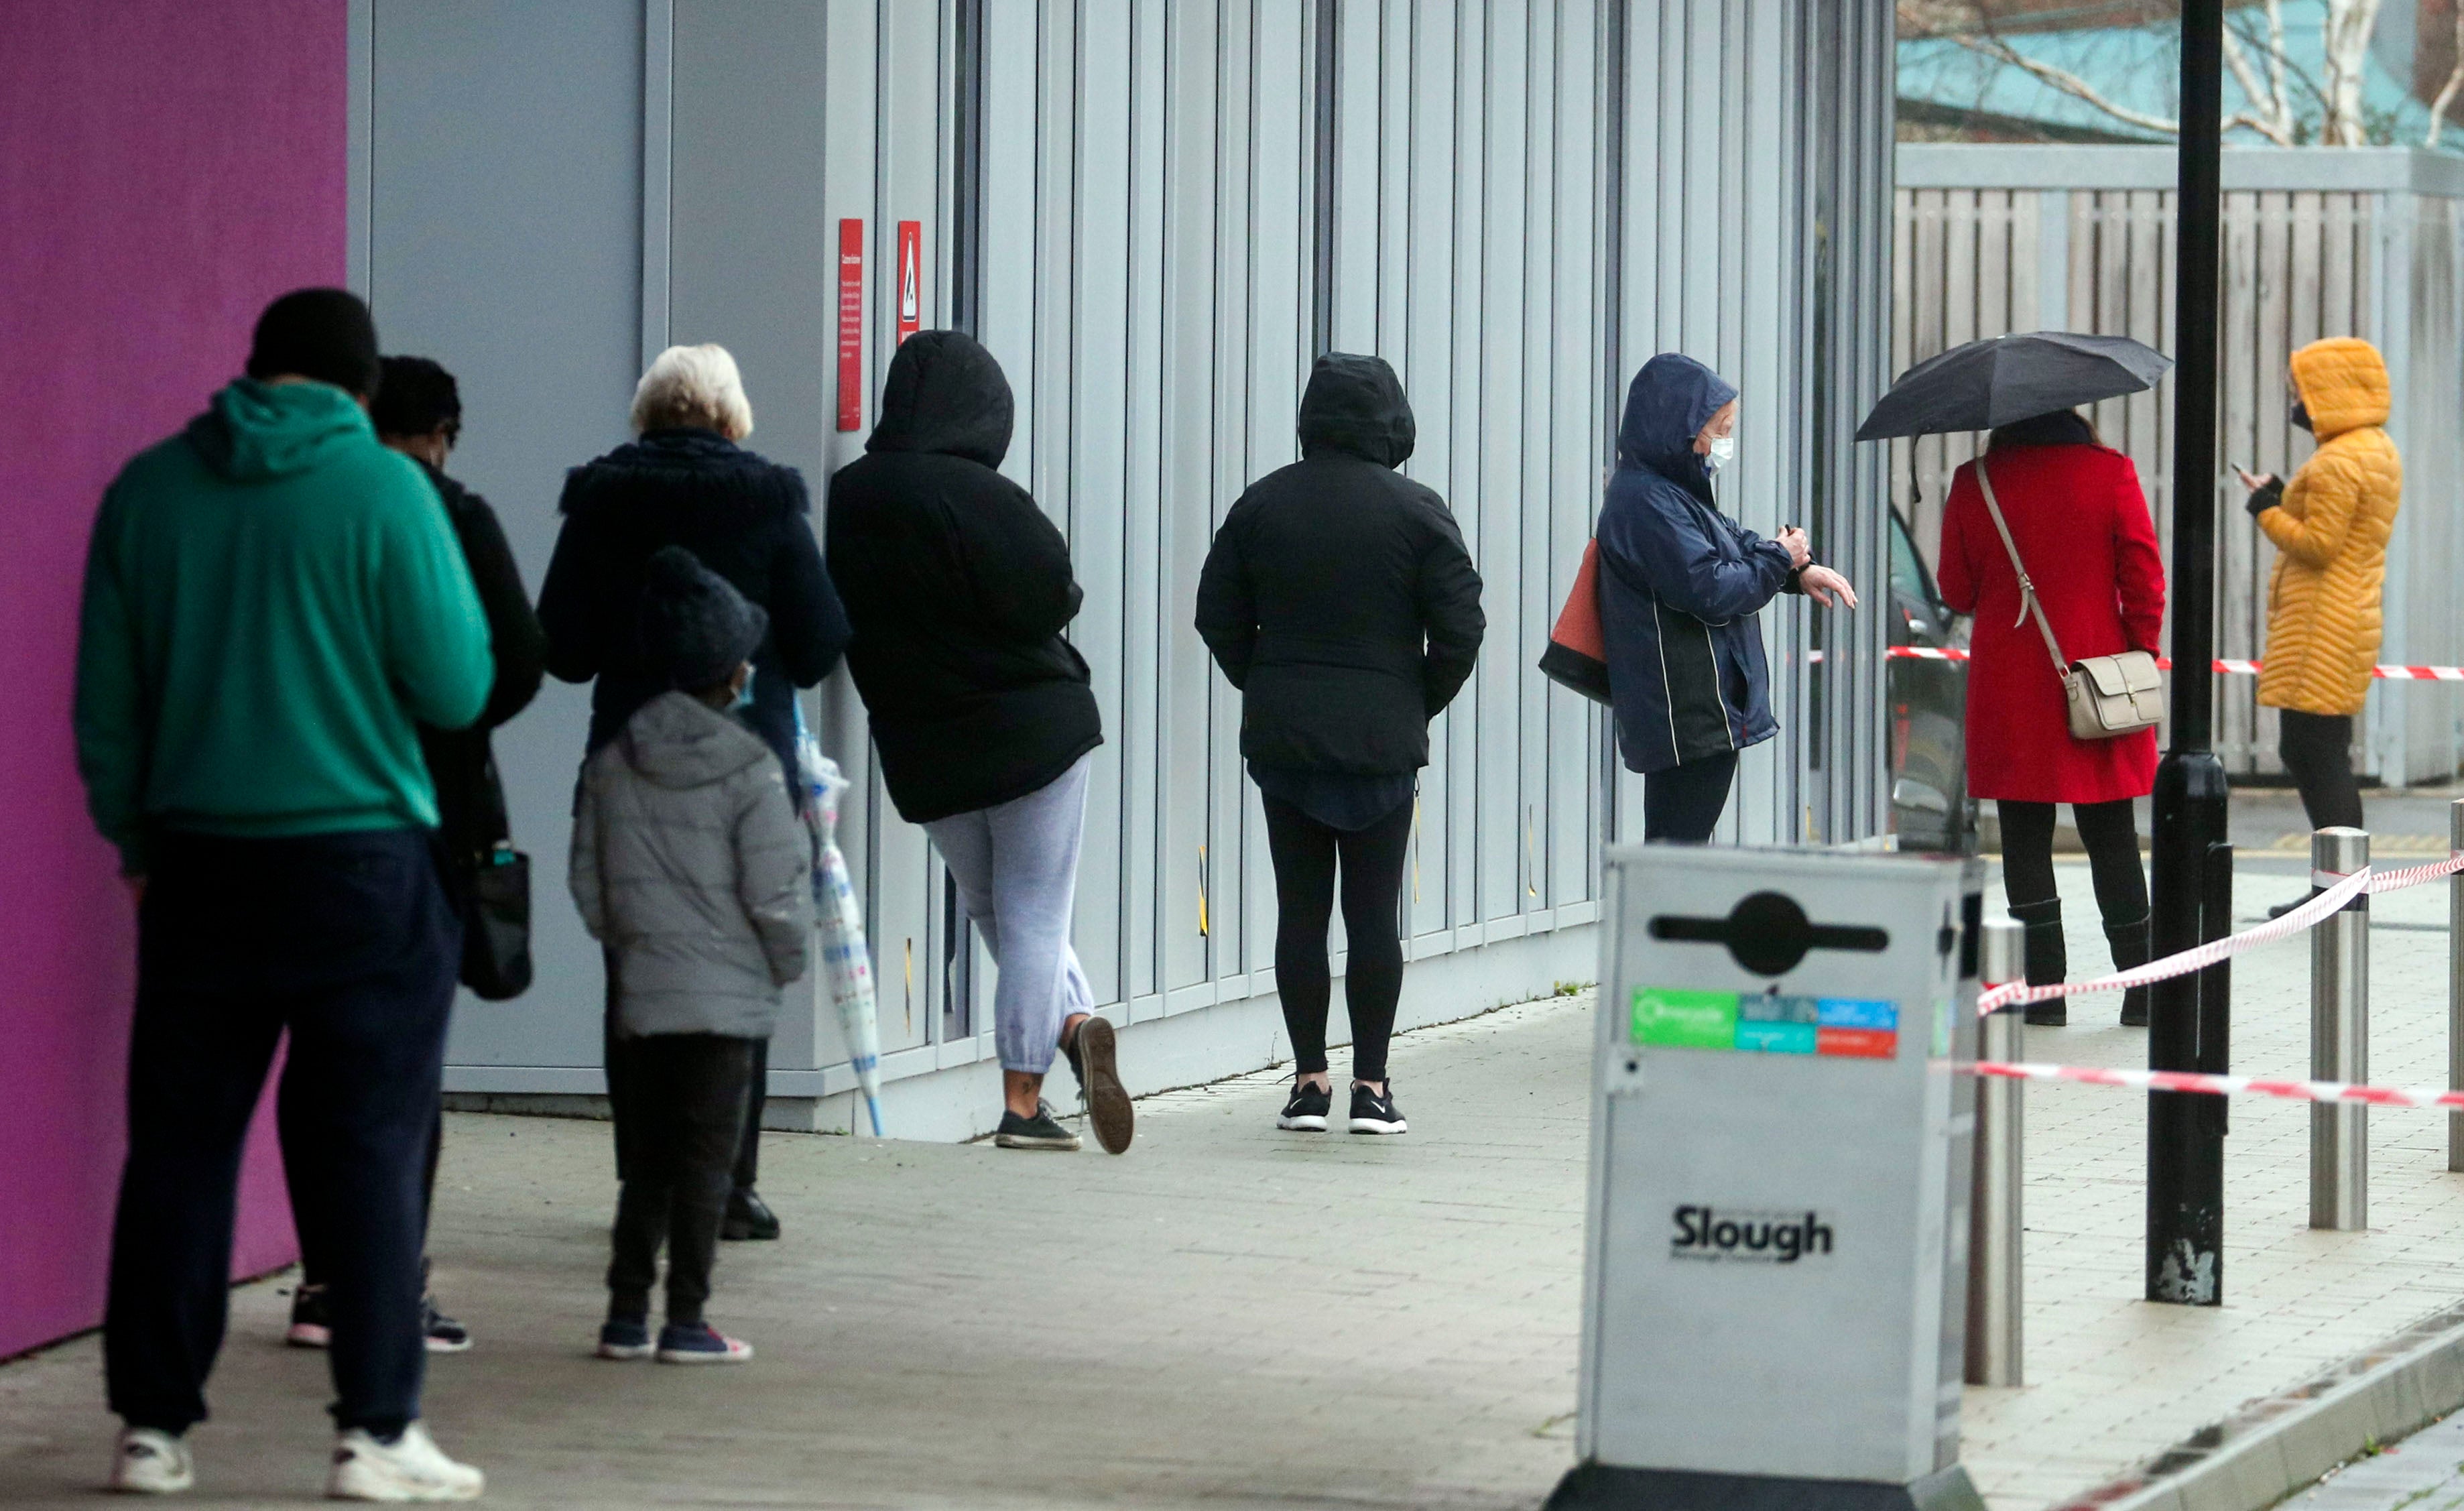 People queue at The Centre in Slough, Berkshire, after a rapid testing hub was opened for locals